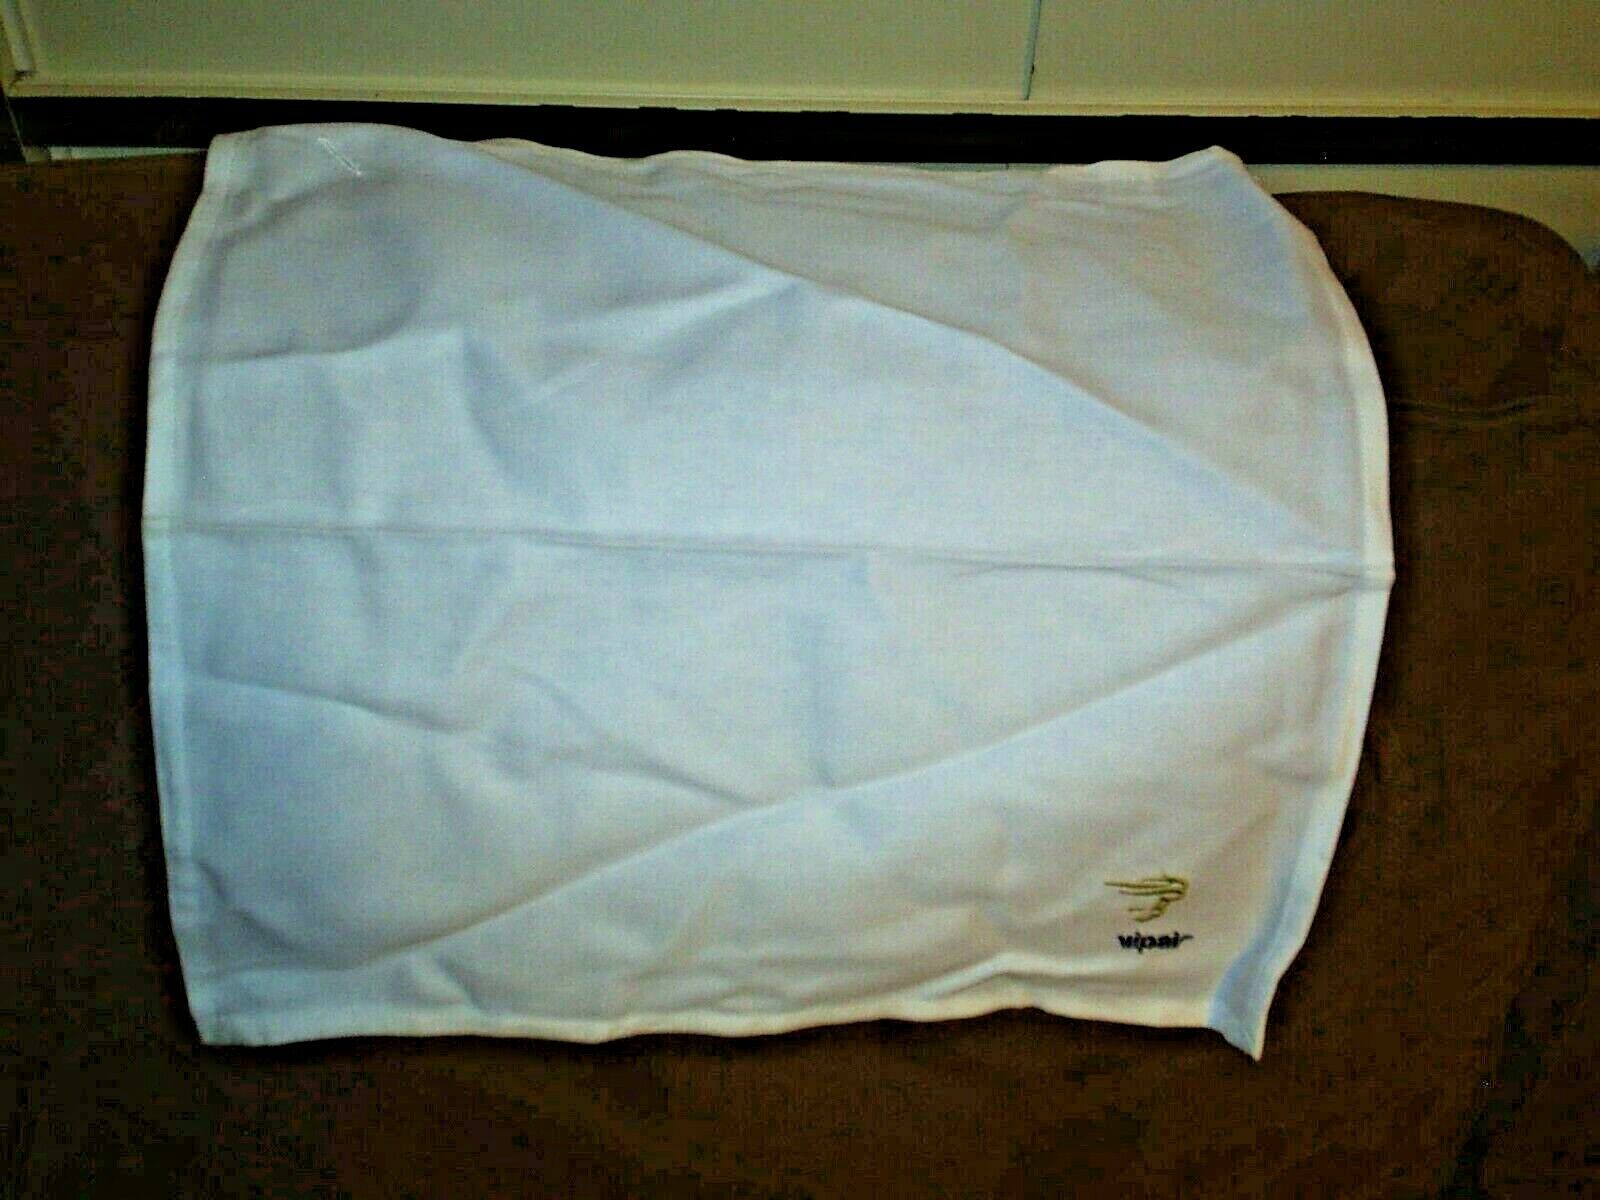 Vipair Airlines Aeroplane Seat Cover/Napkin 90s airline x4